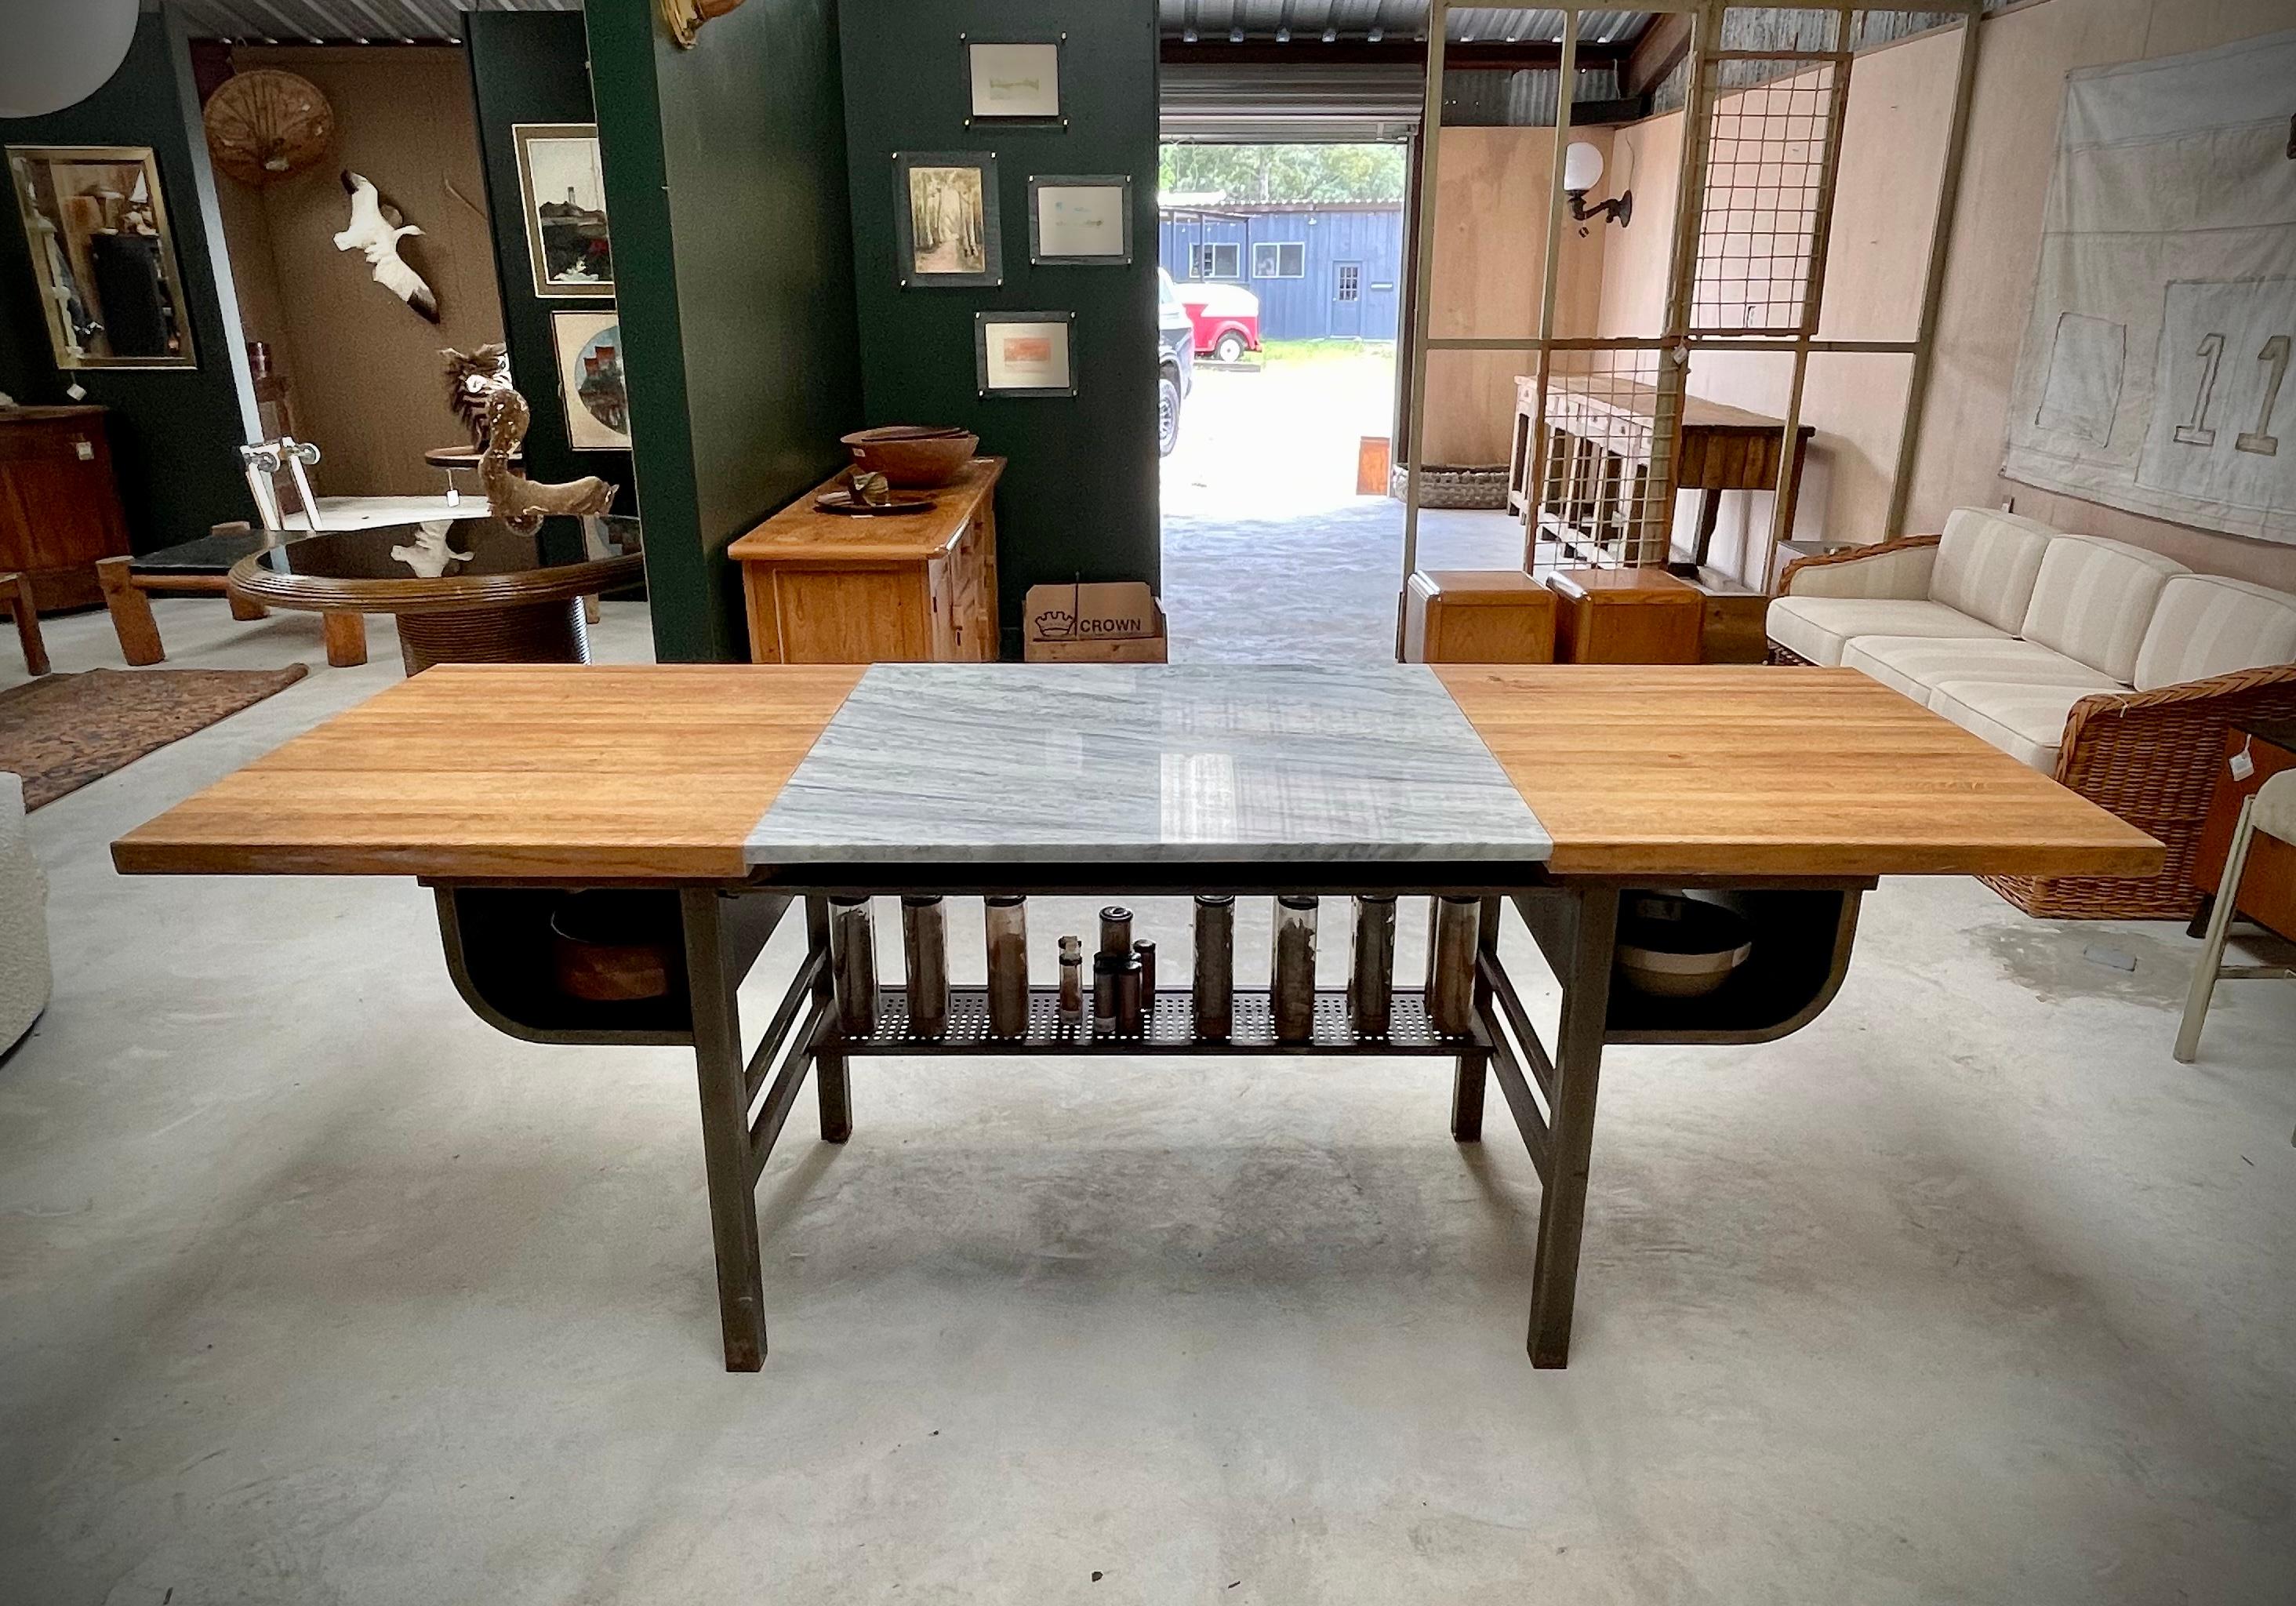 When a vision comes together well, it is always exciting. Combining the durability of old weather oak butcher block with the sophistication of marble, creates a versatile surface ideal for functionality whether you use it as a creative work table or